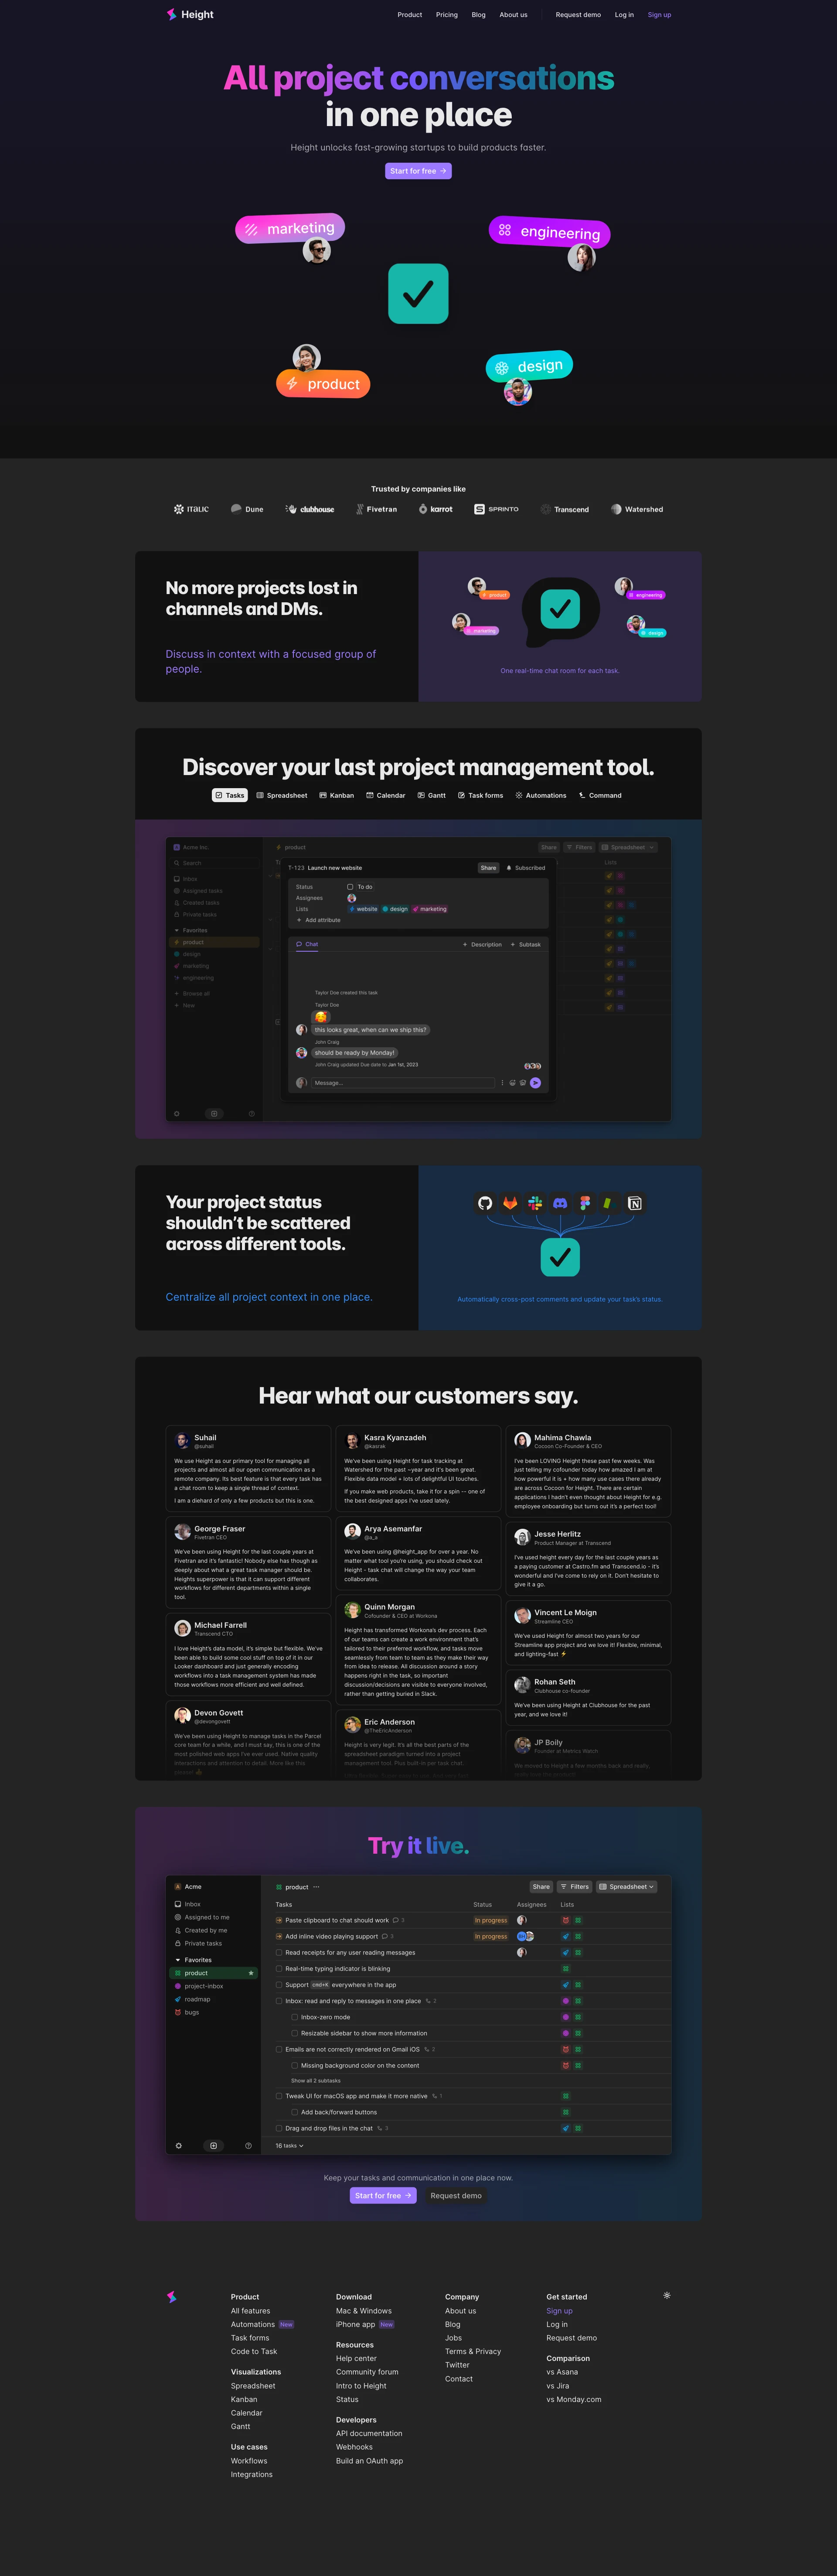 Height Landing Page Example: All project conversations in one place. Height unlocks fast-growing startups to build products faster.